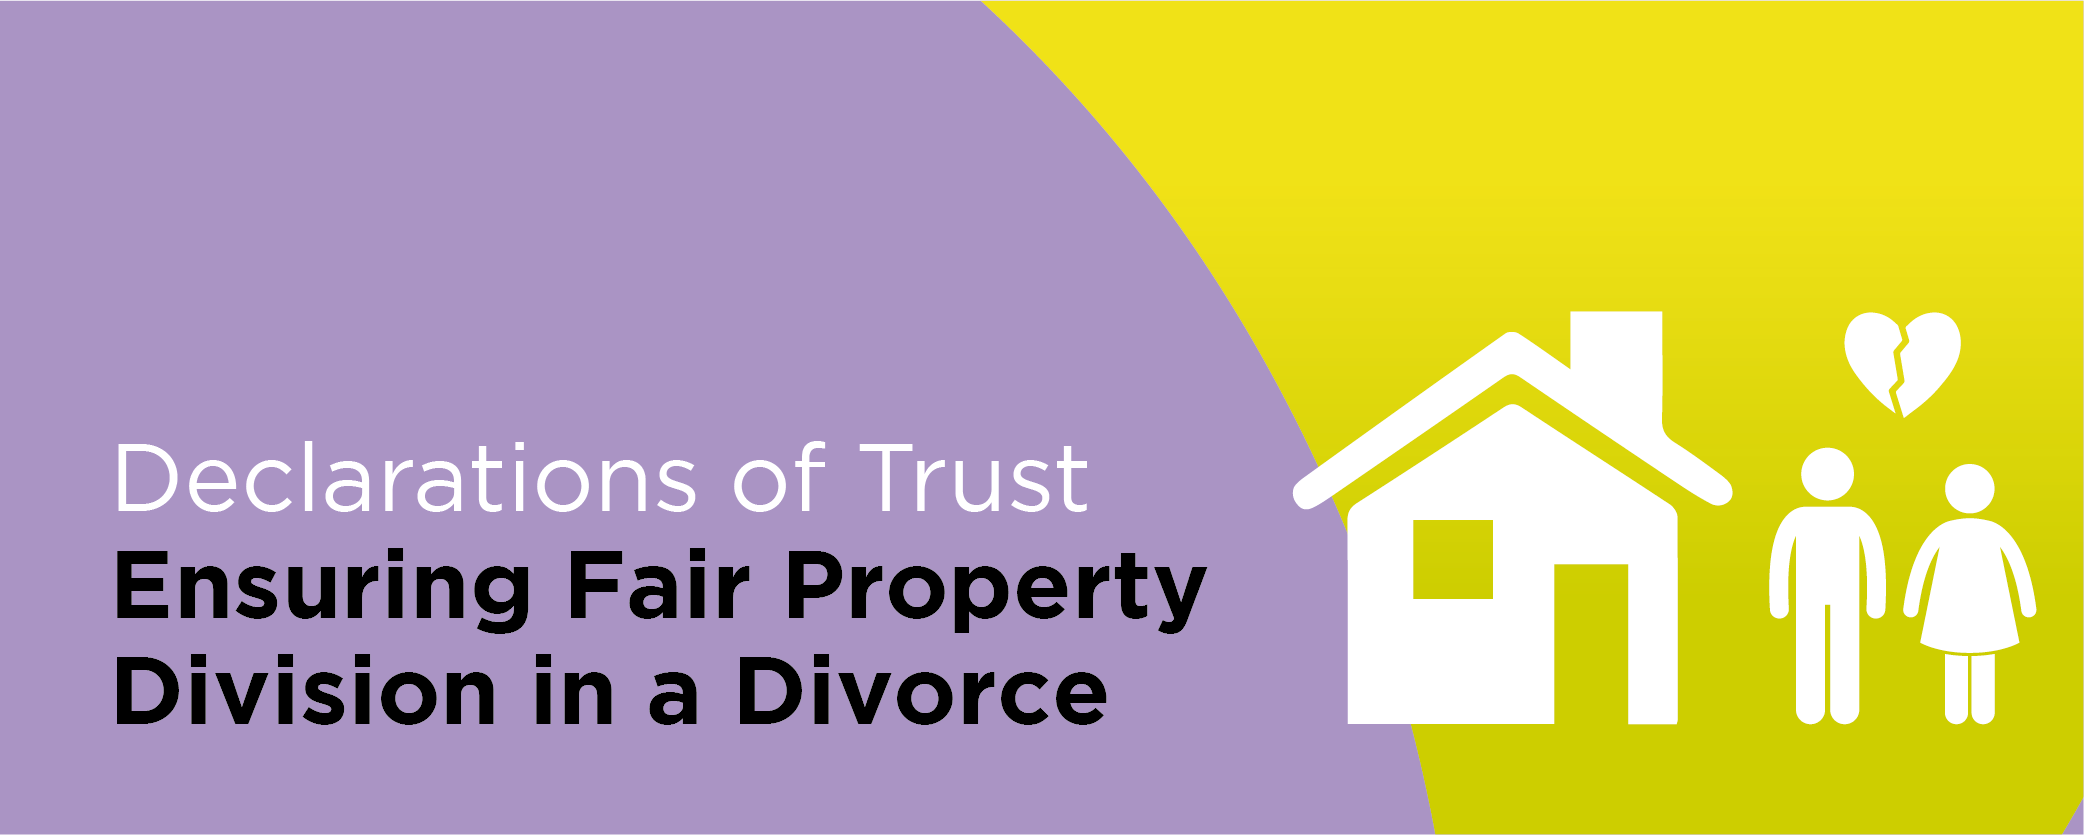 Declarations of Trust: Ensuring Fair Property Division in a Divorce